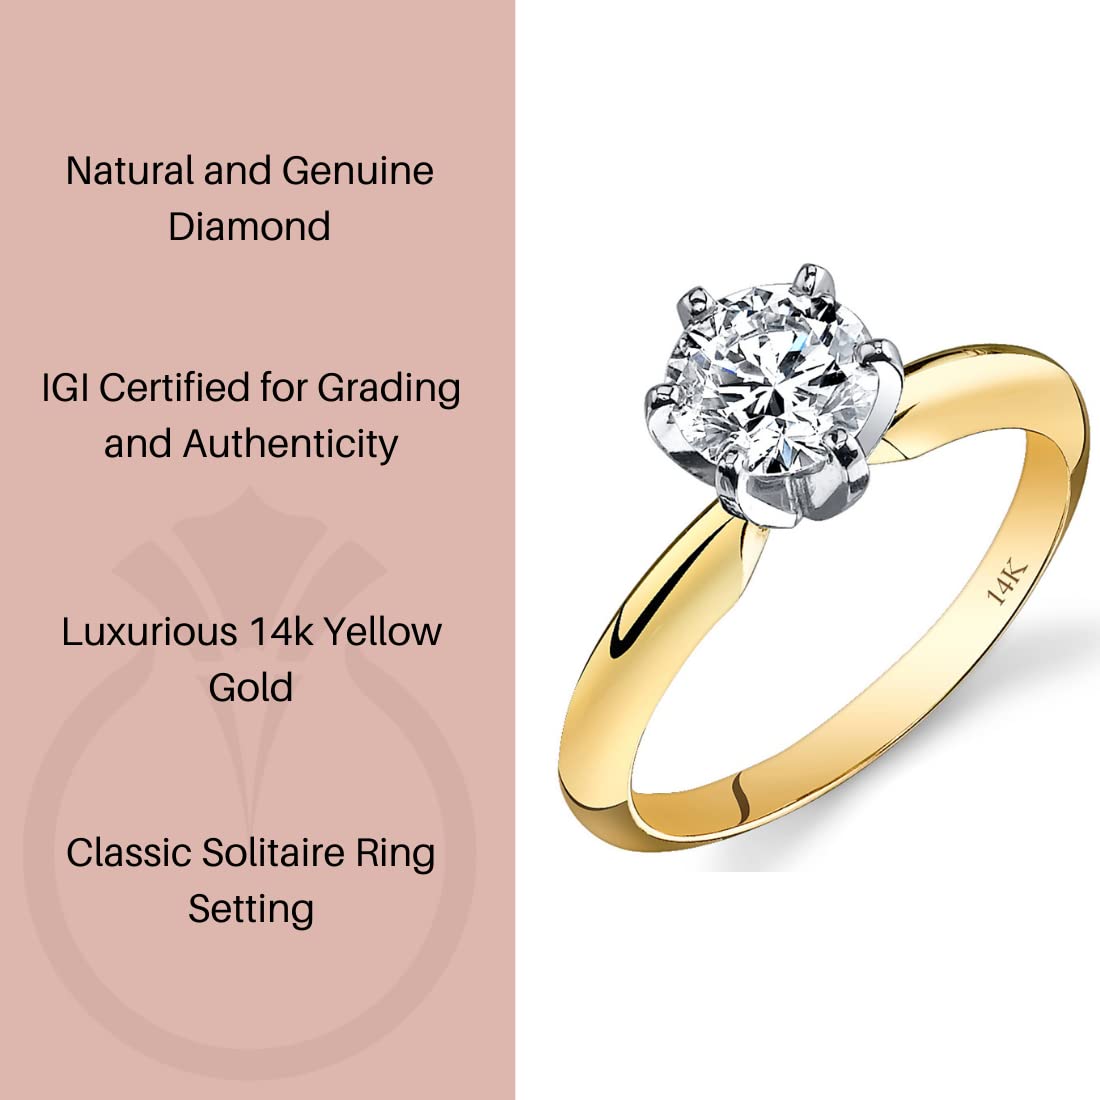 IGI Certified 14K Yellow Gold 1.68 Carats Diamond Engagement Ring G-H Color SI2-I1 Clarity, 2.1mm Band